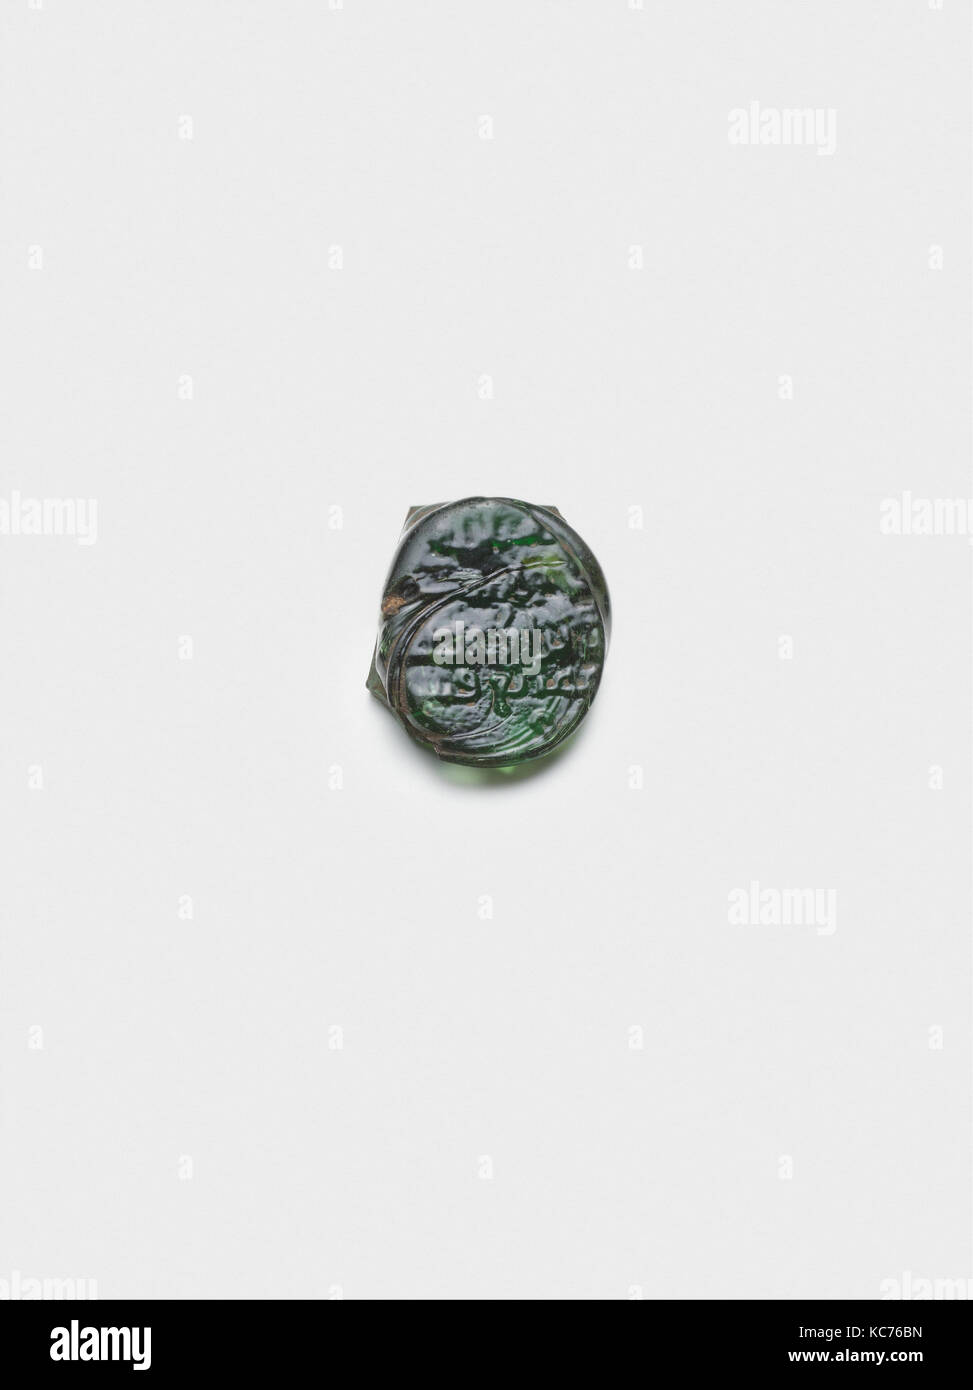 Vessel Stamp, 743–49, Attributed to Egypt, Glass, L. 1 3/8 in. (3.5 cm), Glass Stock Photo